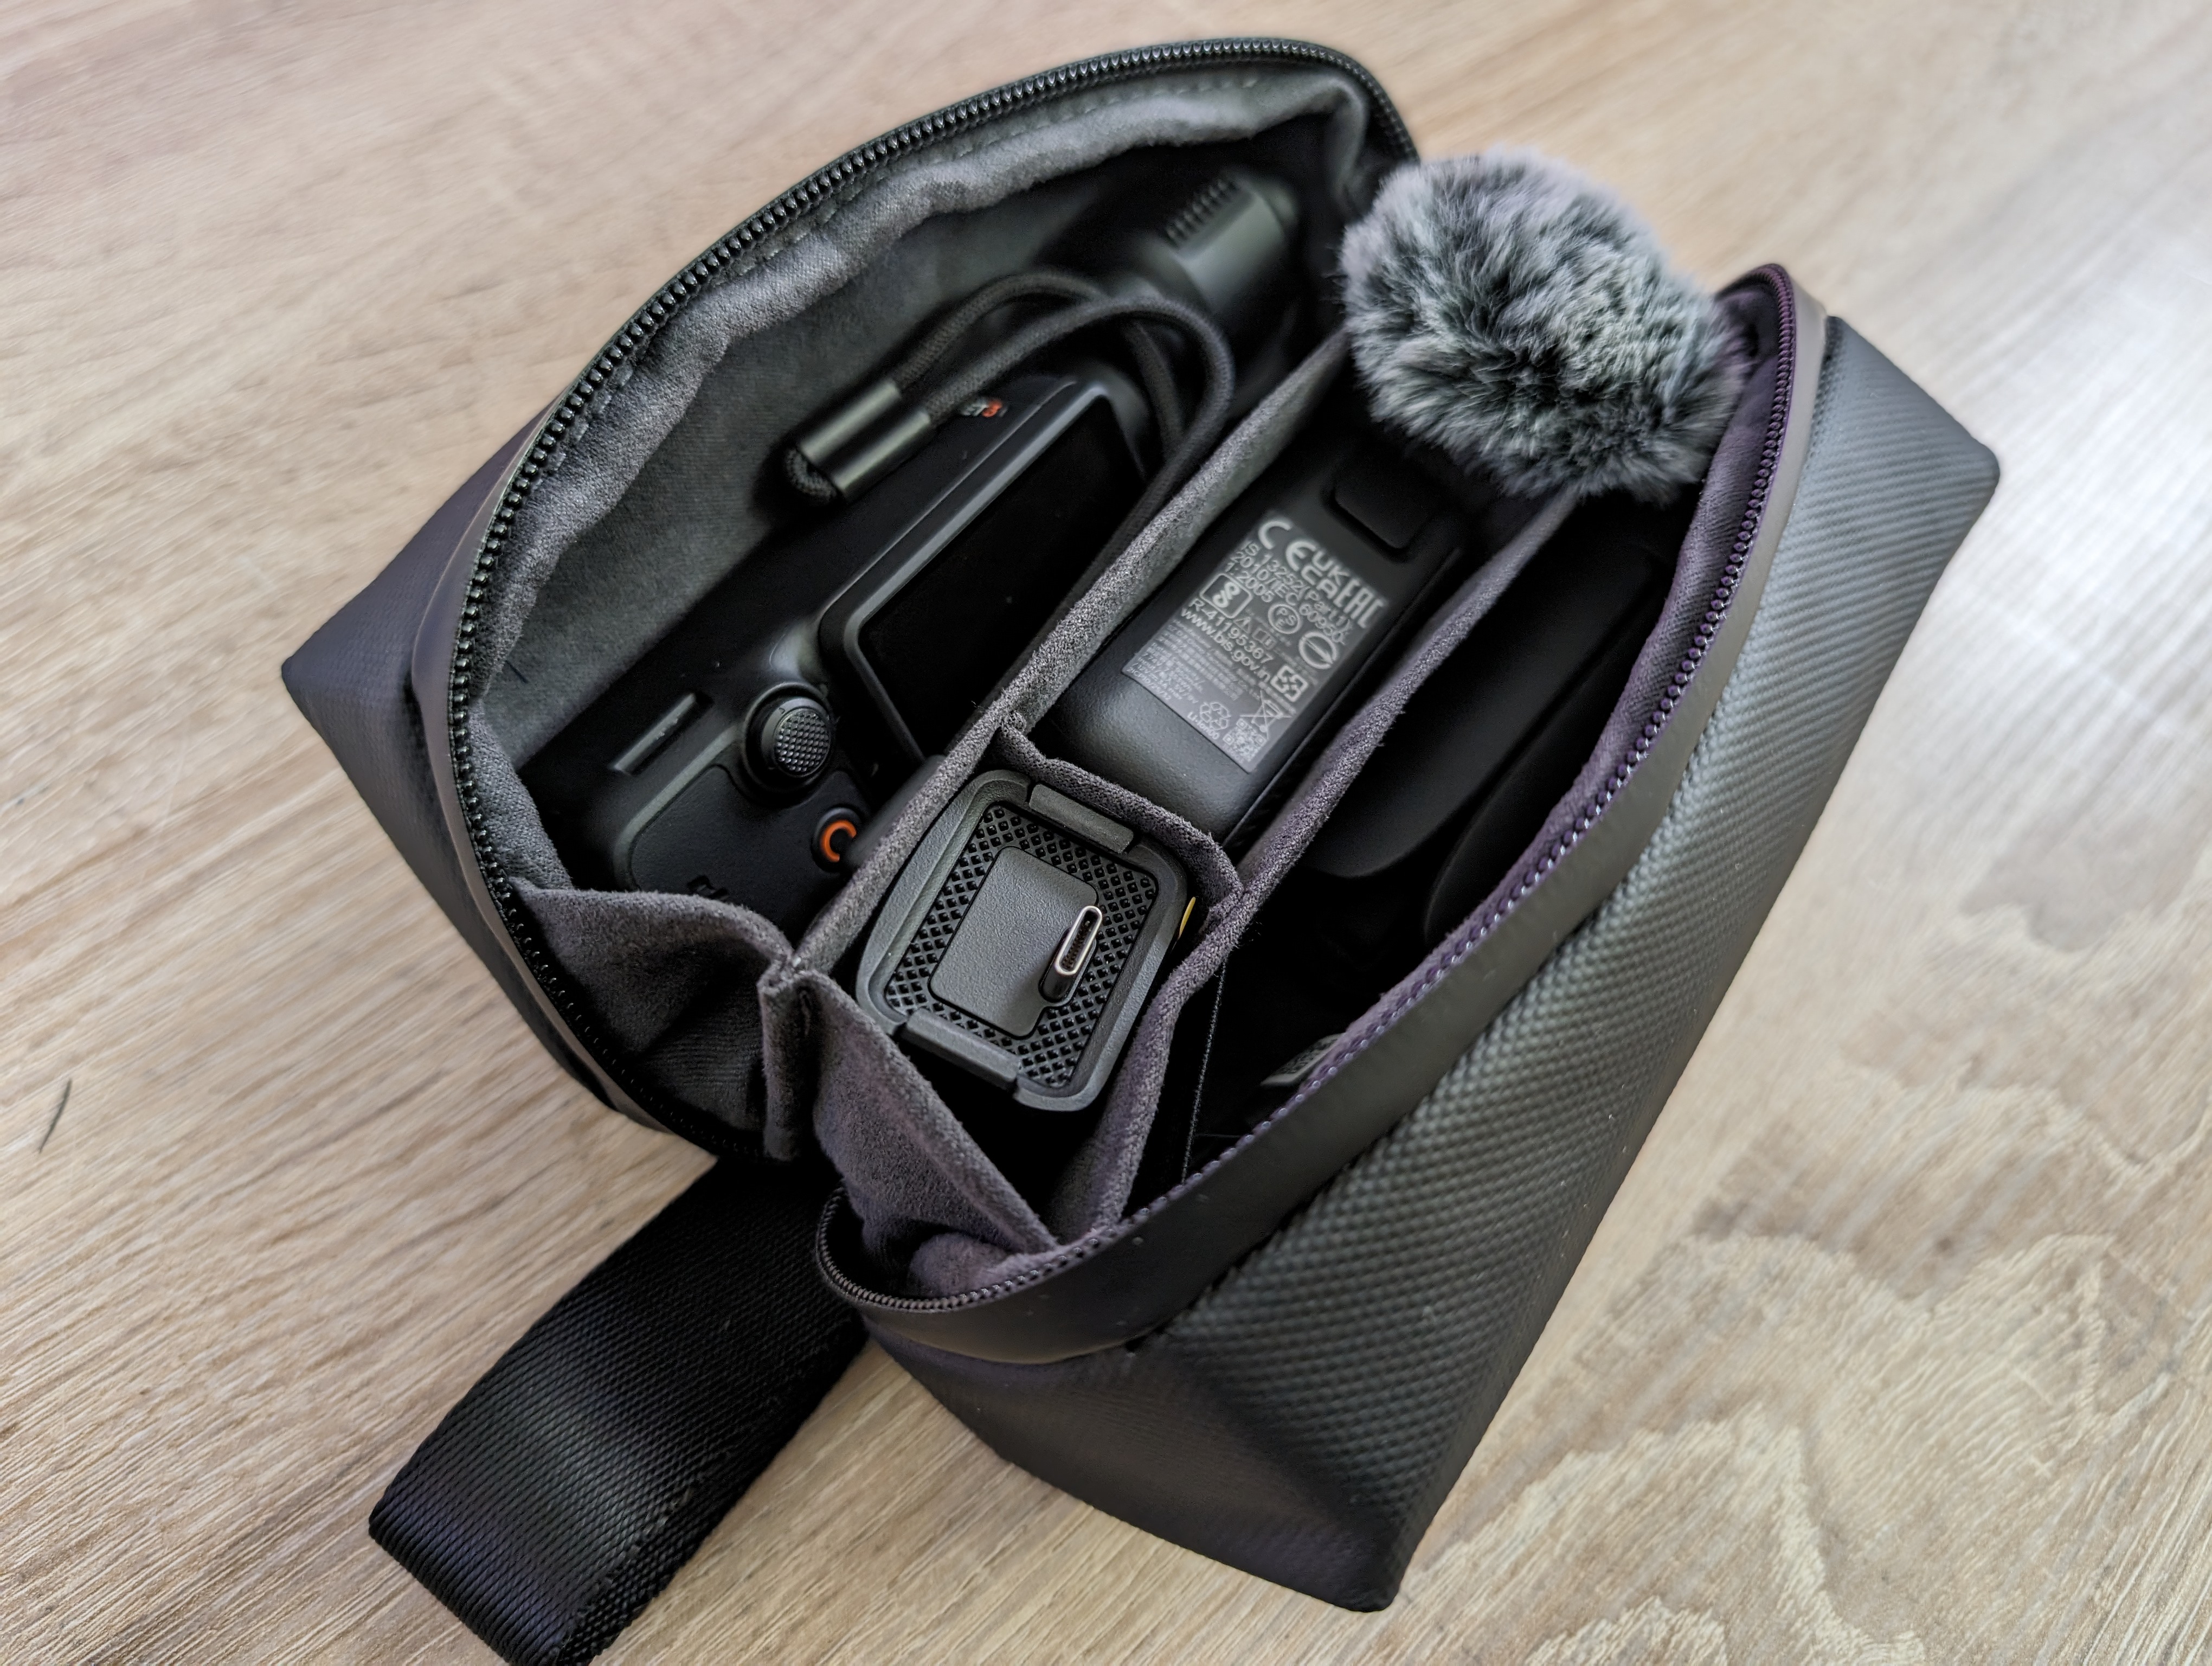 DJI OSMO Pocket 3 all together in the bag.jpg